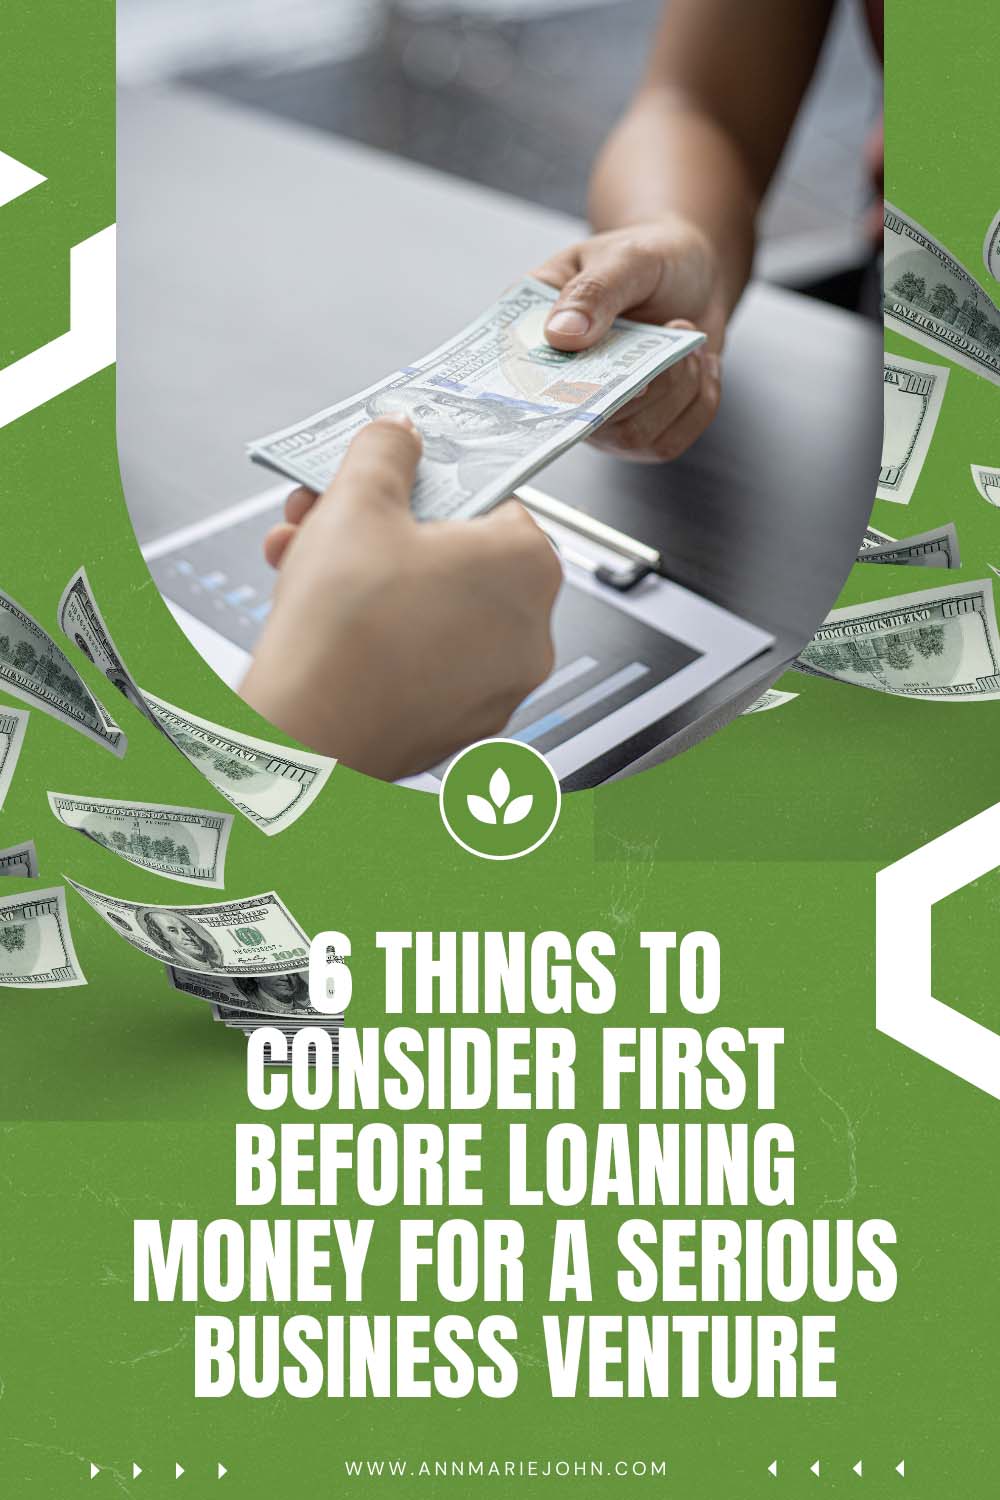 6 Things To Consider First Before Loaning Money For A Serious Business Venture
